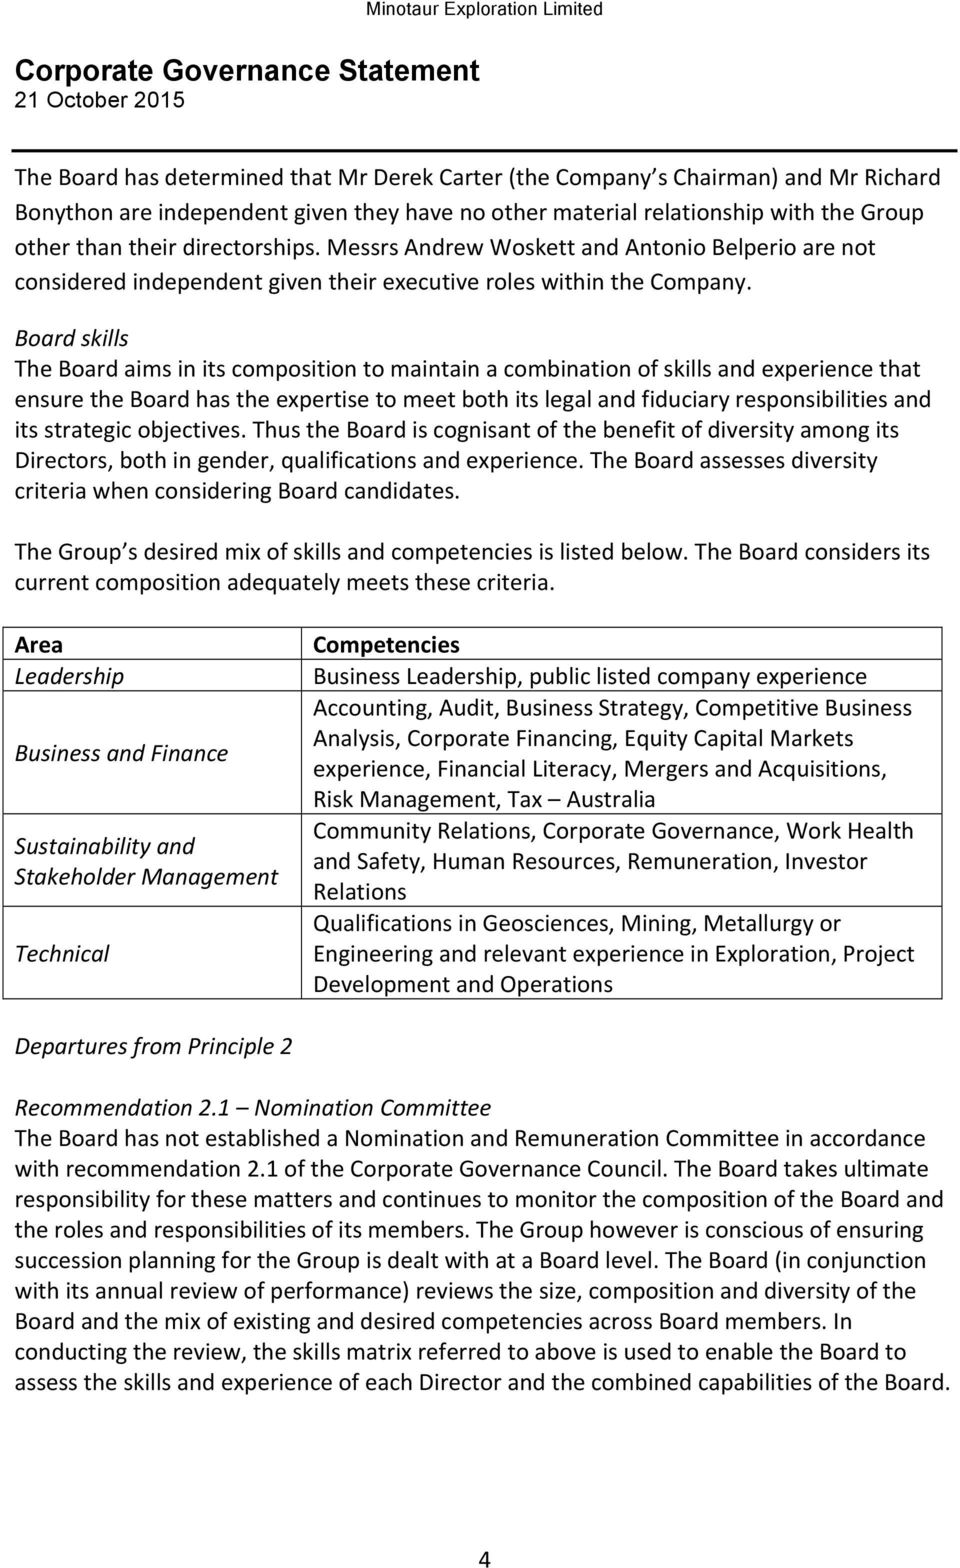 Board skills The Board aims in its composition to maintain a combination of skills and experience that ensure the Board has the expertise to meet both its legal and fiduciary responsibilities and its